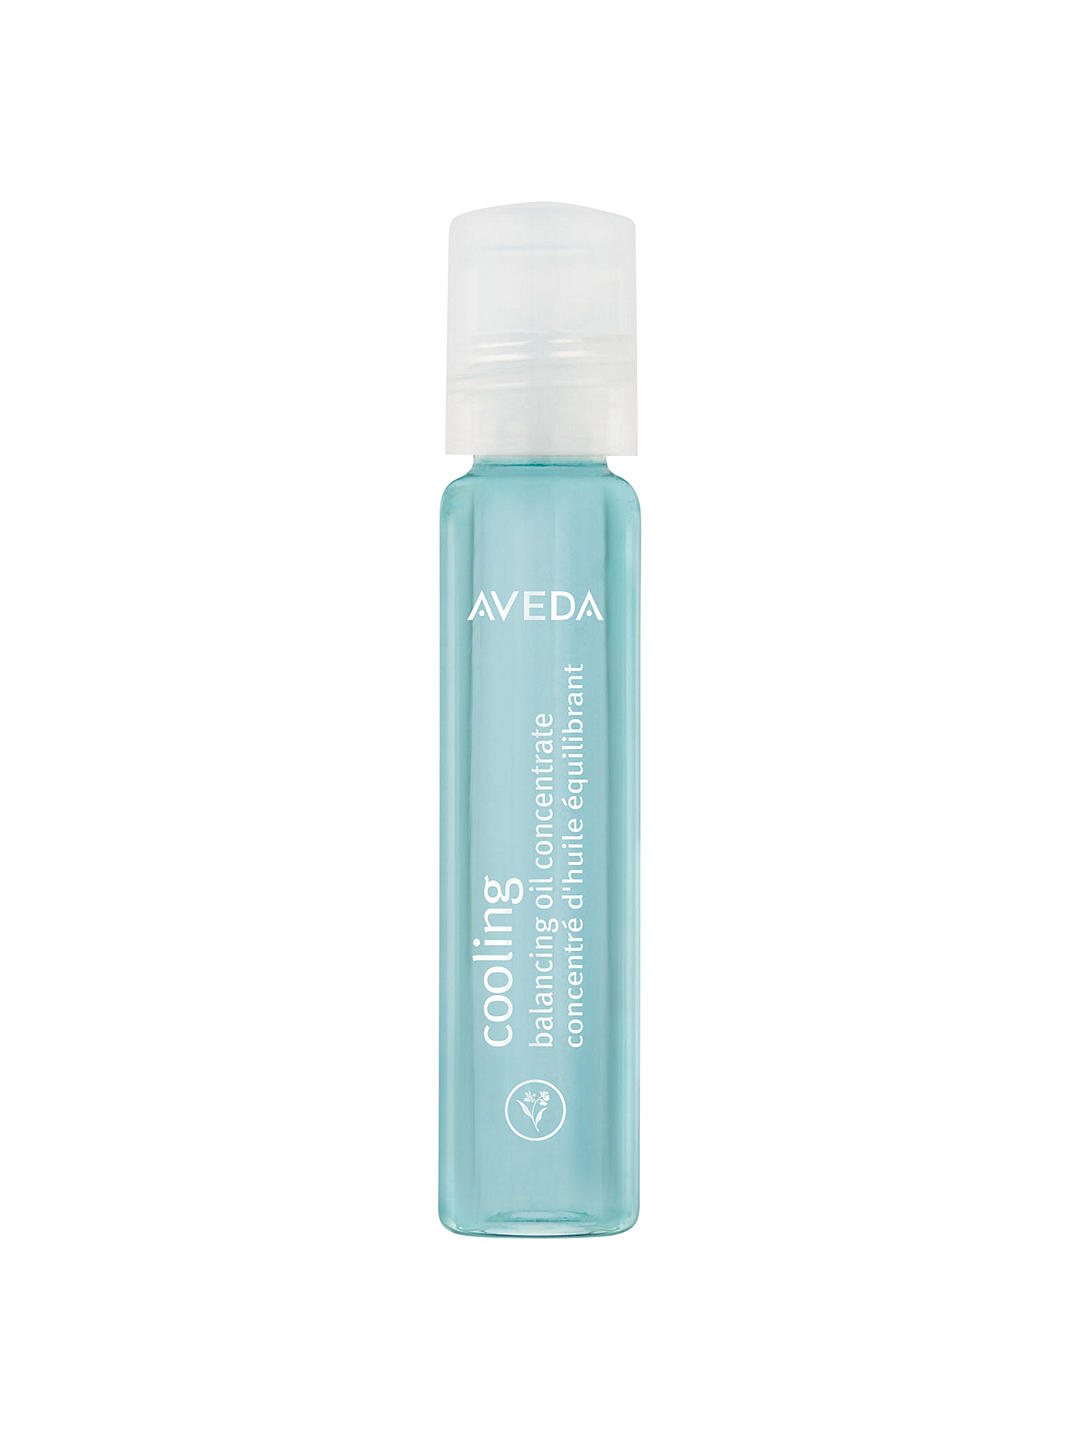 Aveda Cooling Muscle Relief Oil Rollerball, 7ml 1